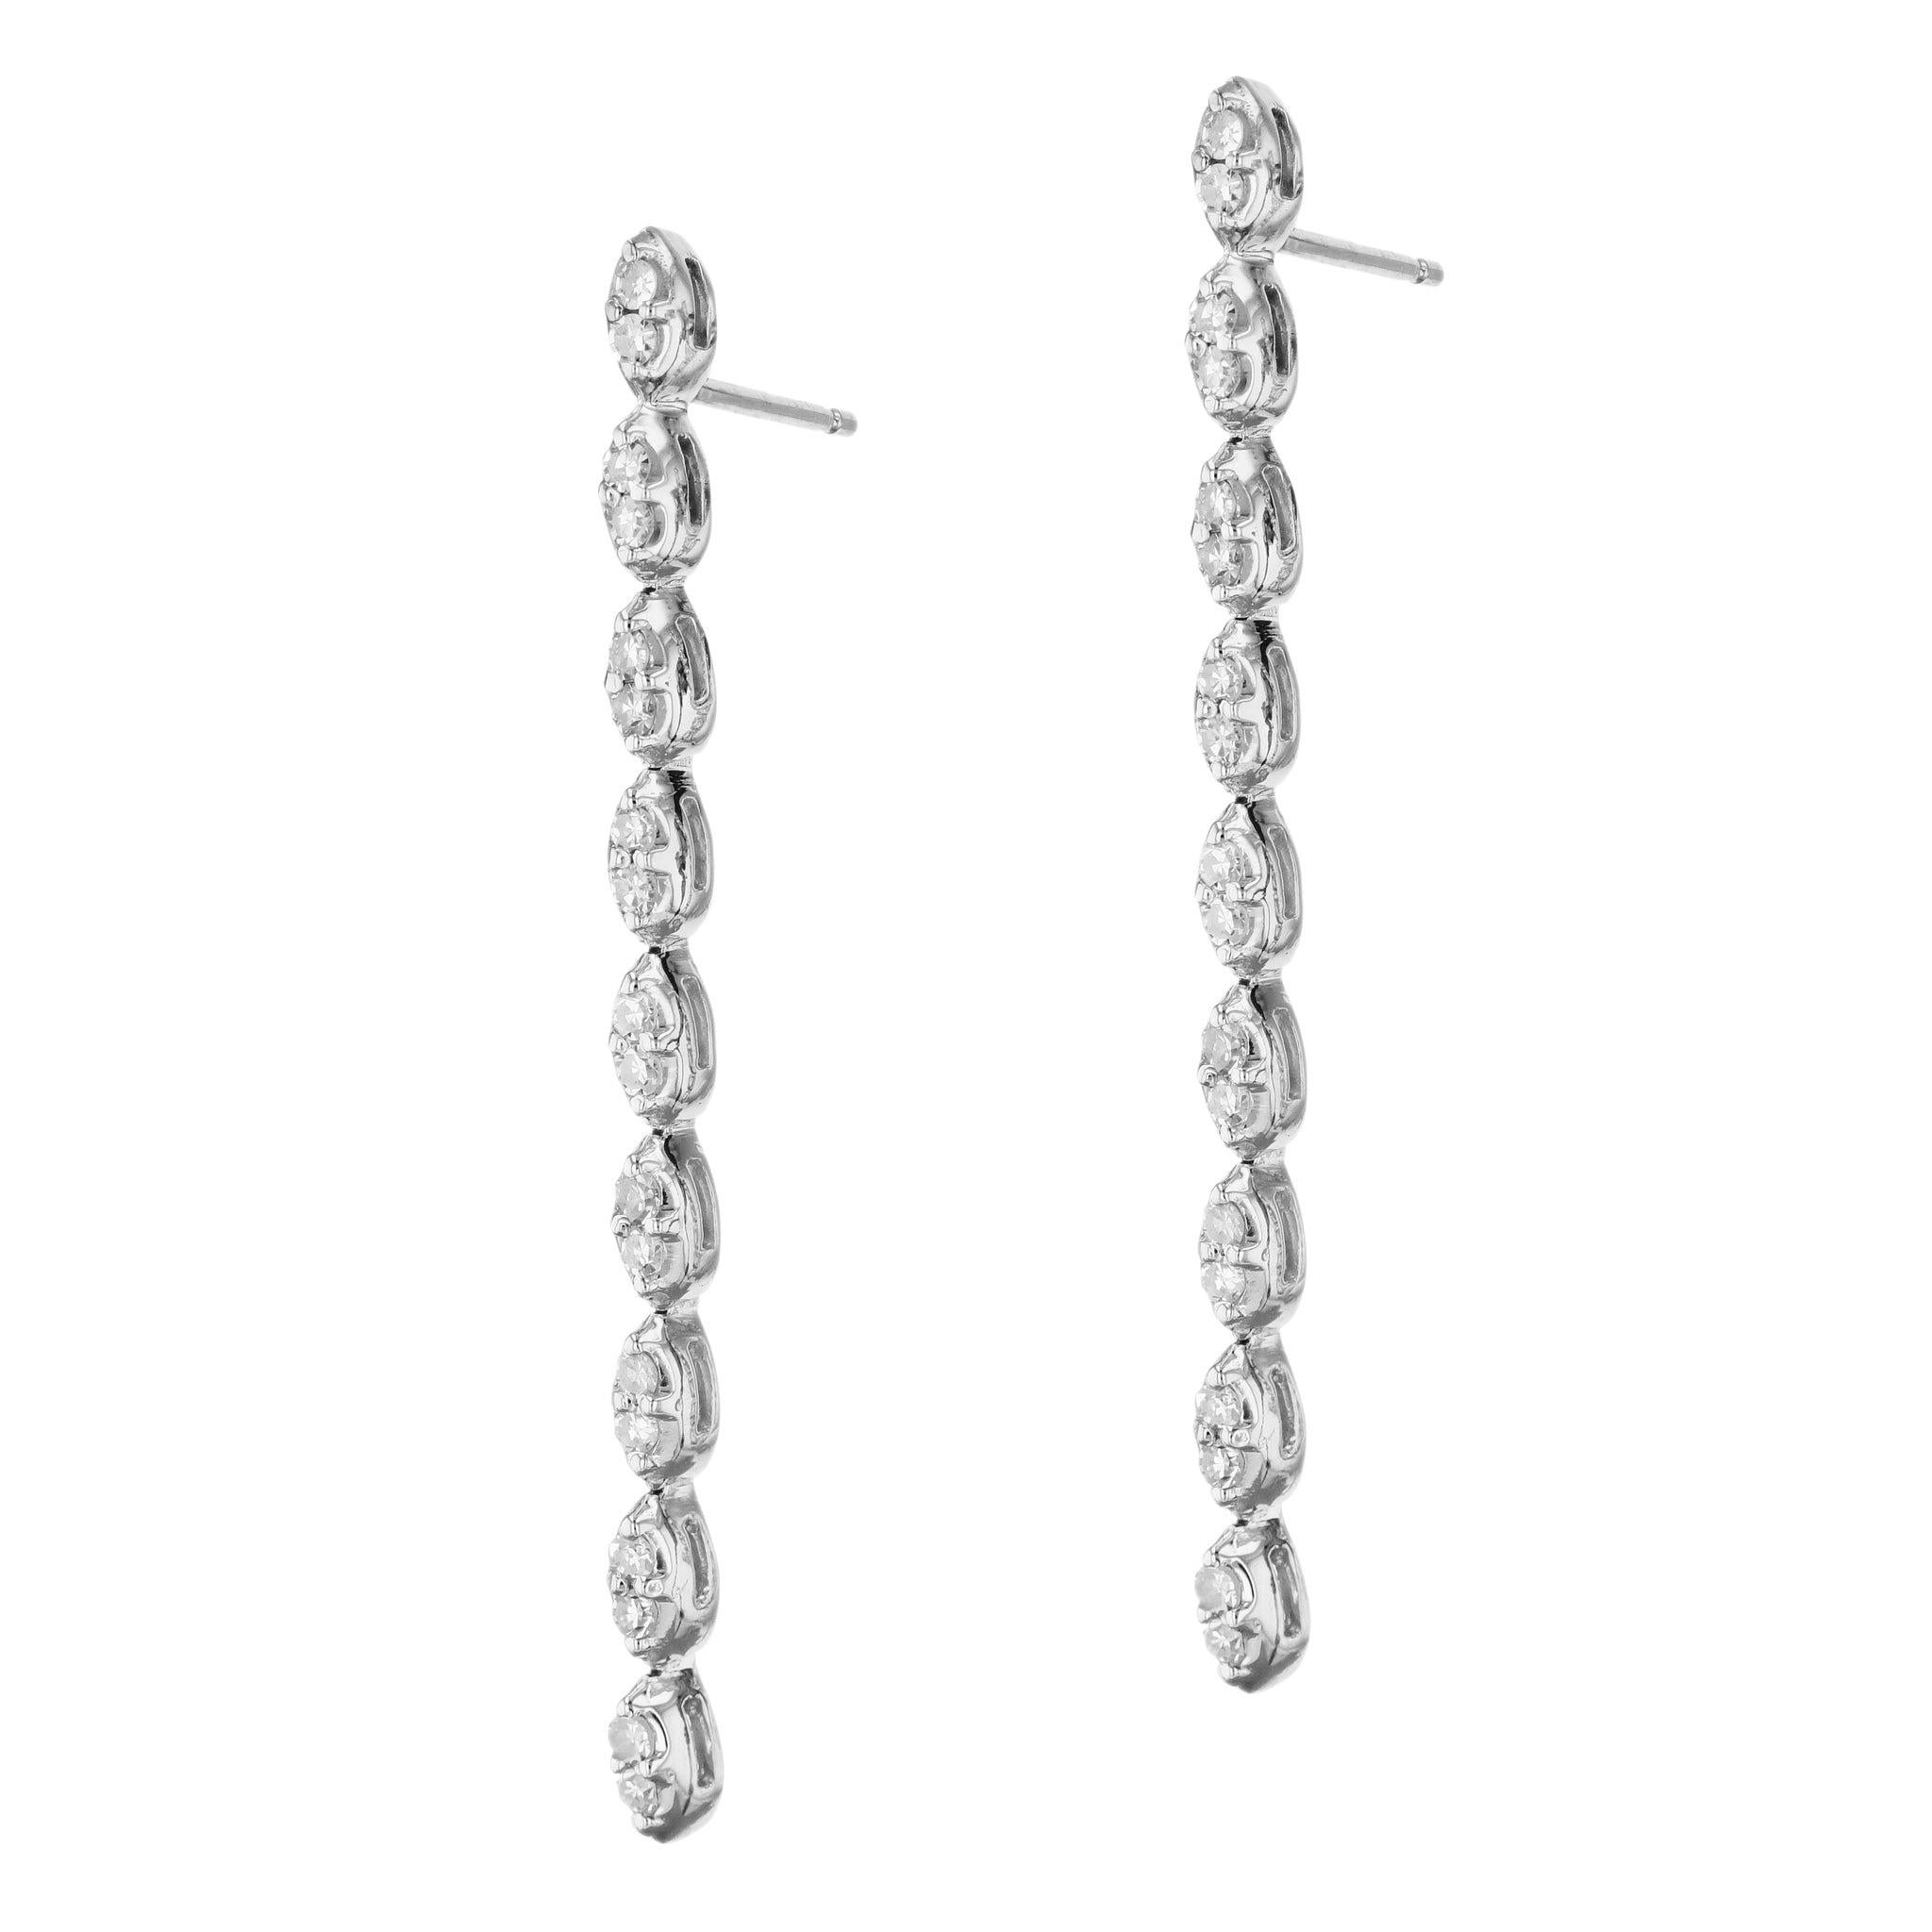 Glimmering in 14kt white gold and encrusted with 36 single cut diamonds, these Diamond Pave White Gold Estate Drop Earrings evoke joy and opulence. An Estate Collection standout, these earrings are the perfect way to add a vivid sparkle to any